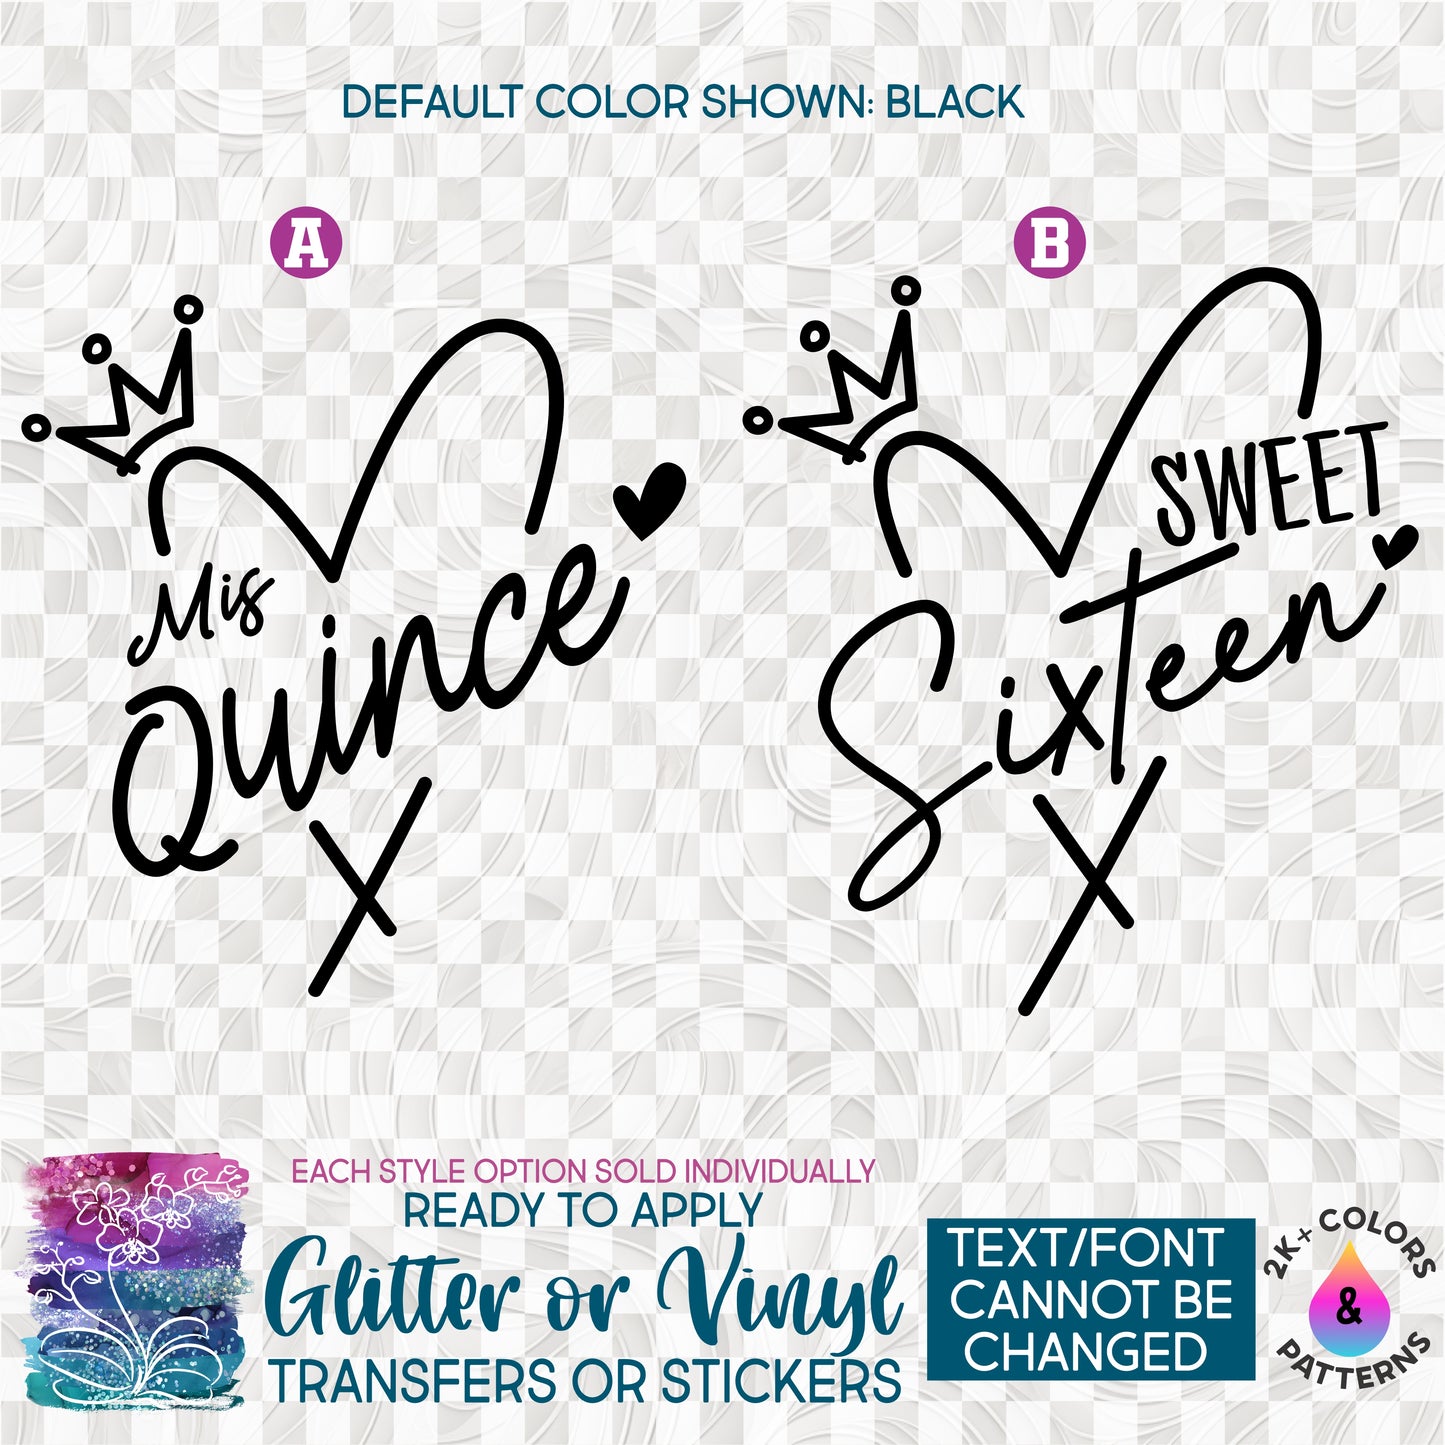 (s357-4) Mis Quince, Sweet Sixteen, Heart Crown Glitter or Vinyl Iron-On Transfer or Sticker